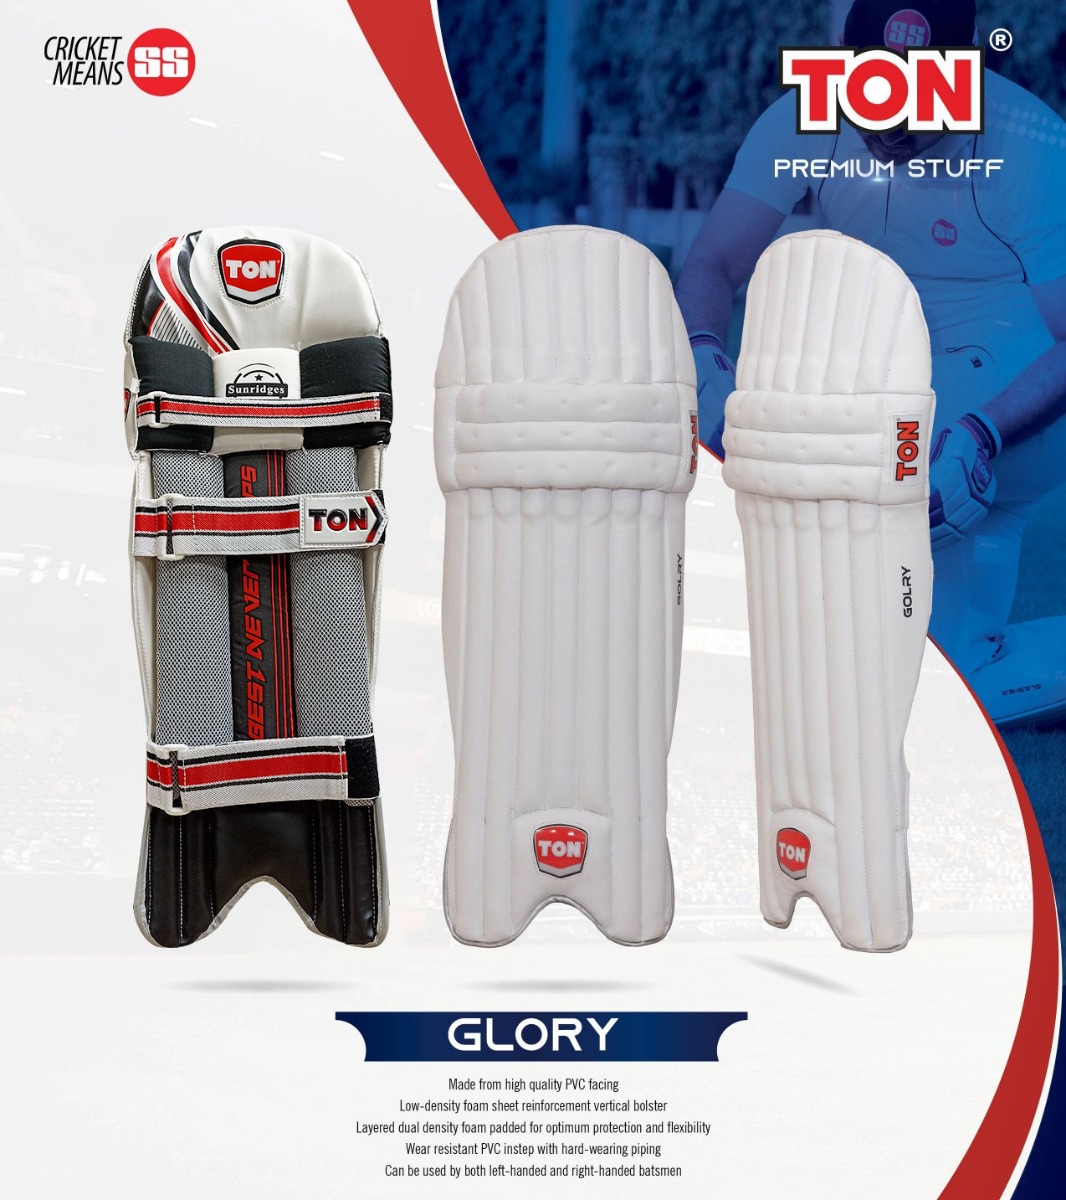 SS Ton Glory Batting Pads Features